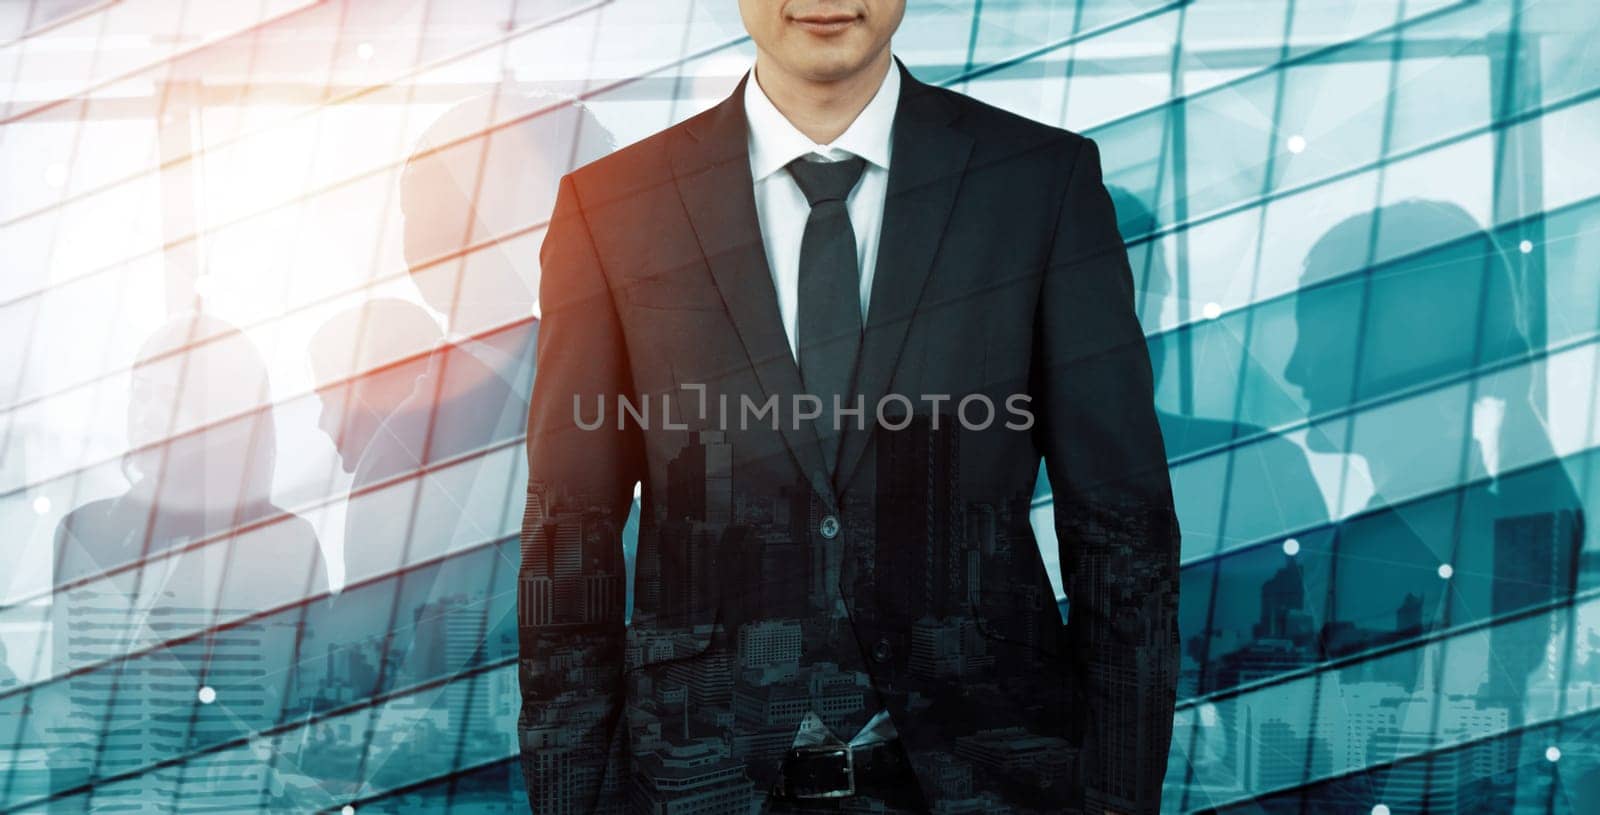 Double Exposure Image of Success Business People on abstract modern city background. Future business and communication technology concept. Surreal futuristic multiple exposure graphic interface. uds